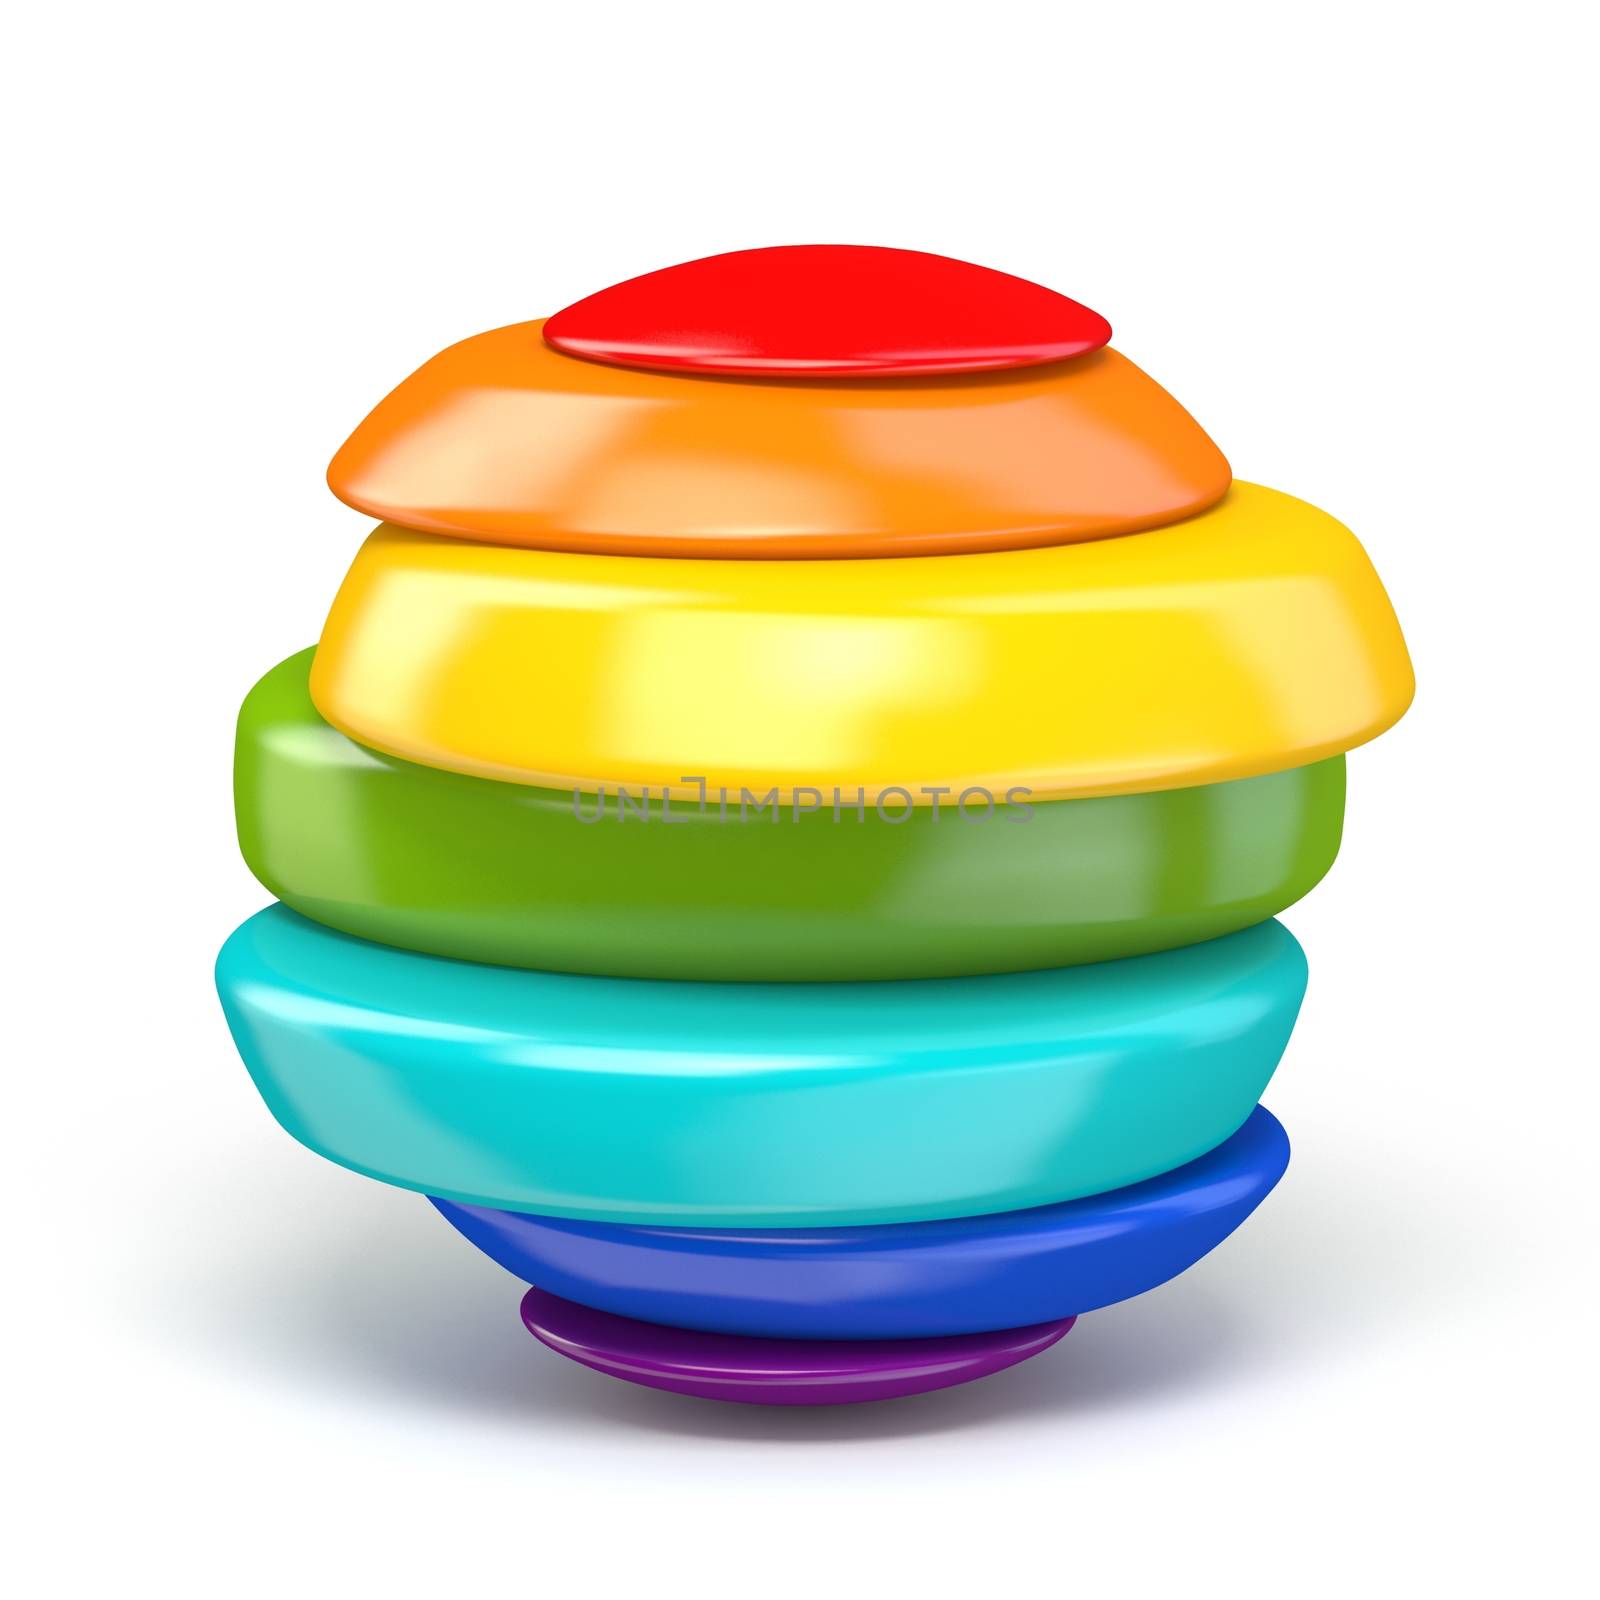 Sliced rainbow colored ball 3D render illustration isolated on white background